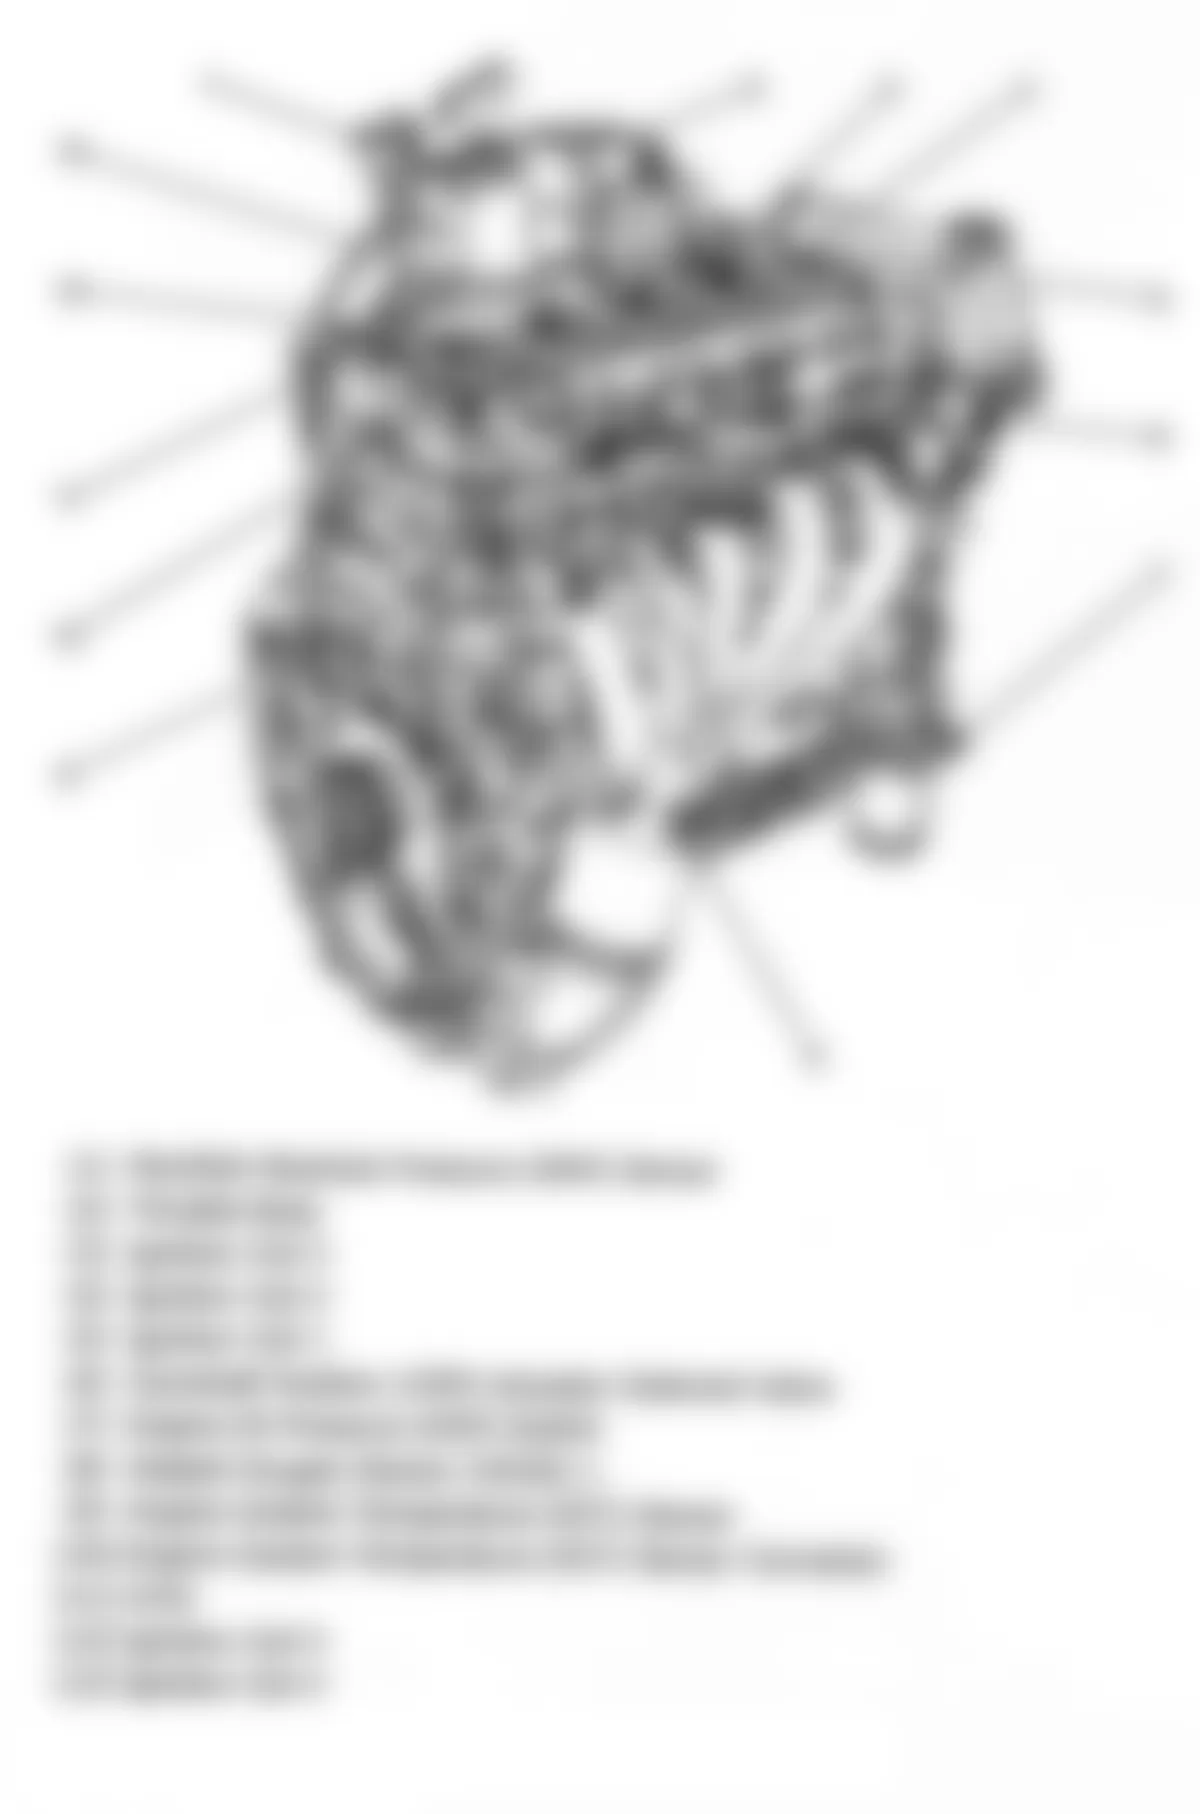 Hummer H3T 2009 - Component Locations -  Right Rear Of Engine